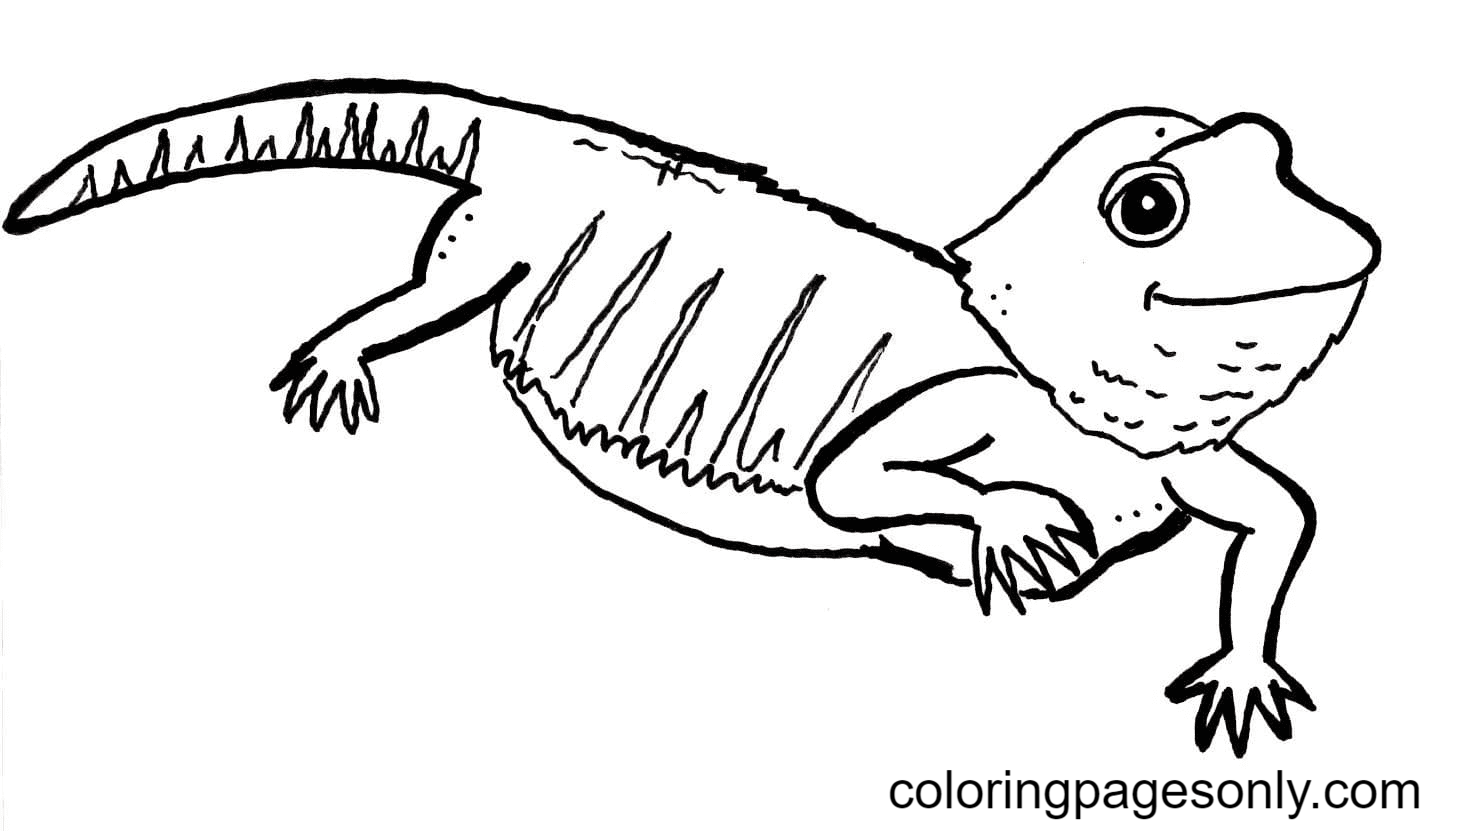 Smiling Lizard Coloring Page